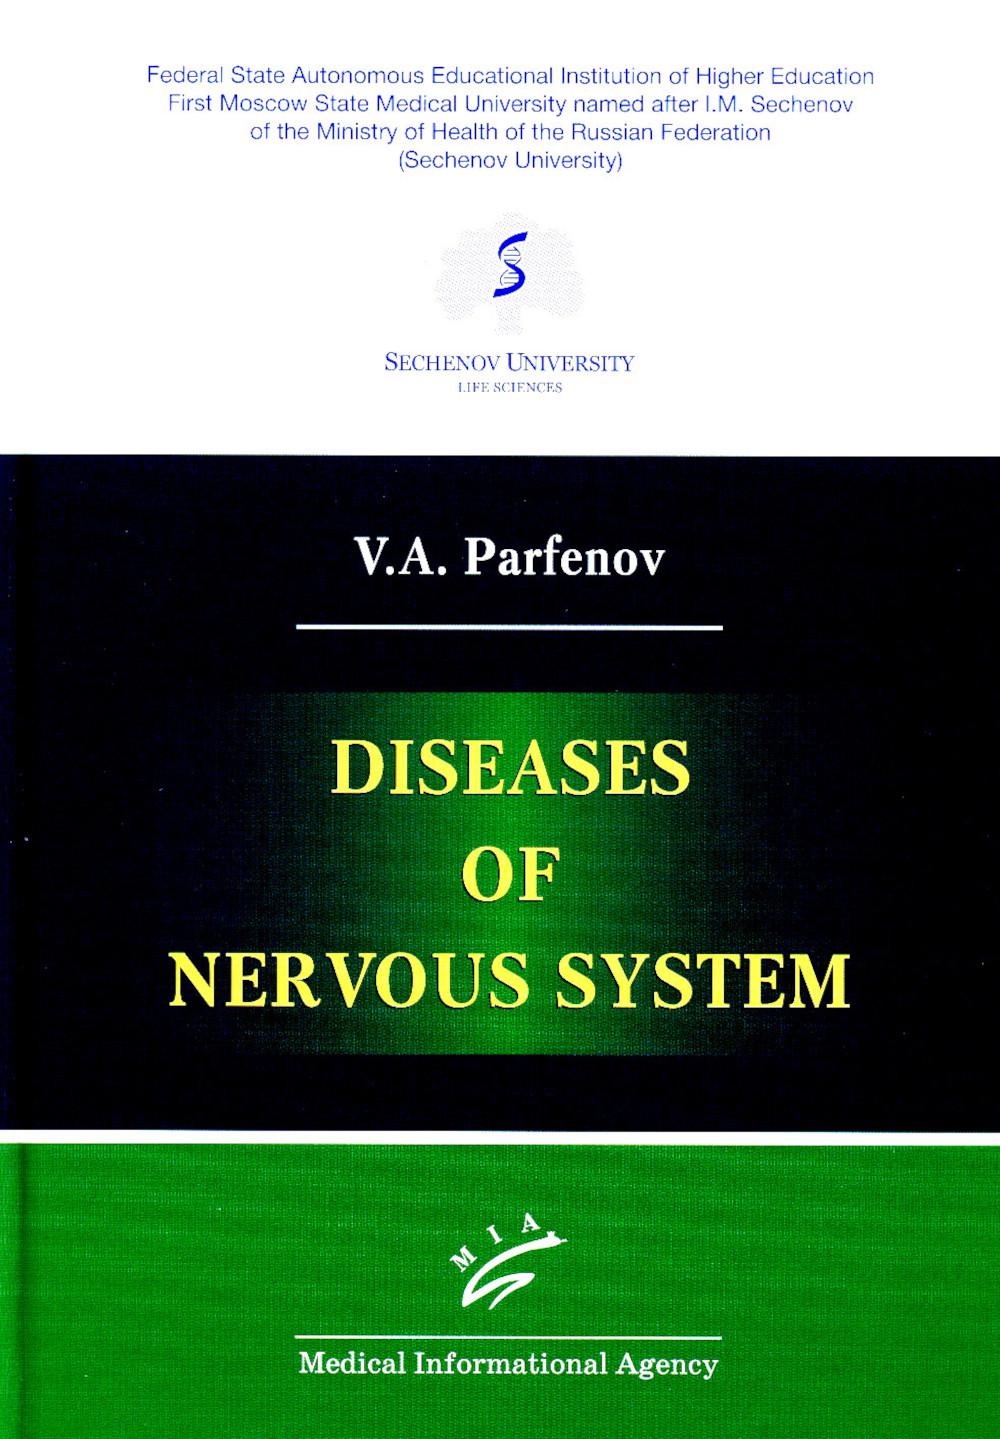 Diseases of nervous system